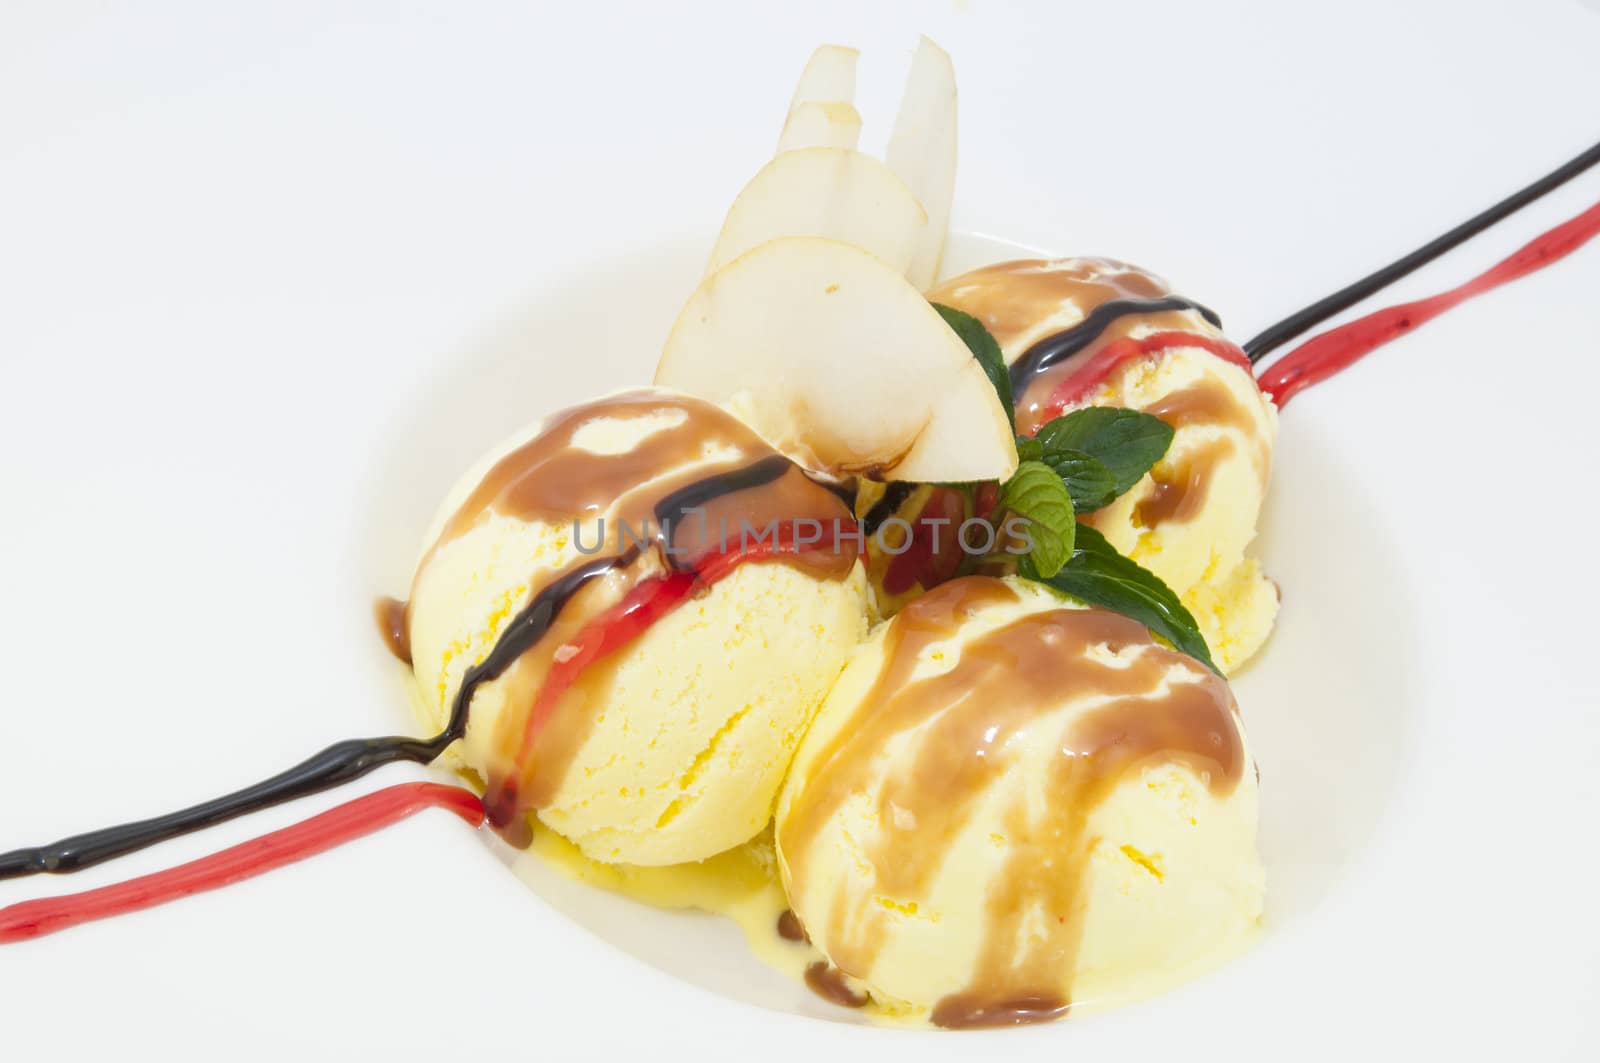 balls of ice cream decorated with mint on a white background in the restaurant